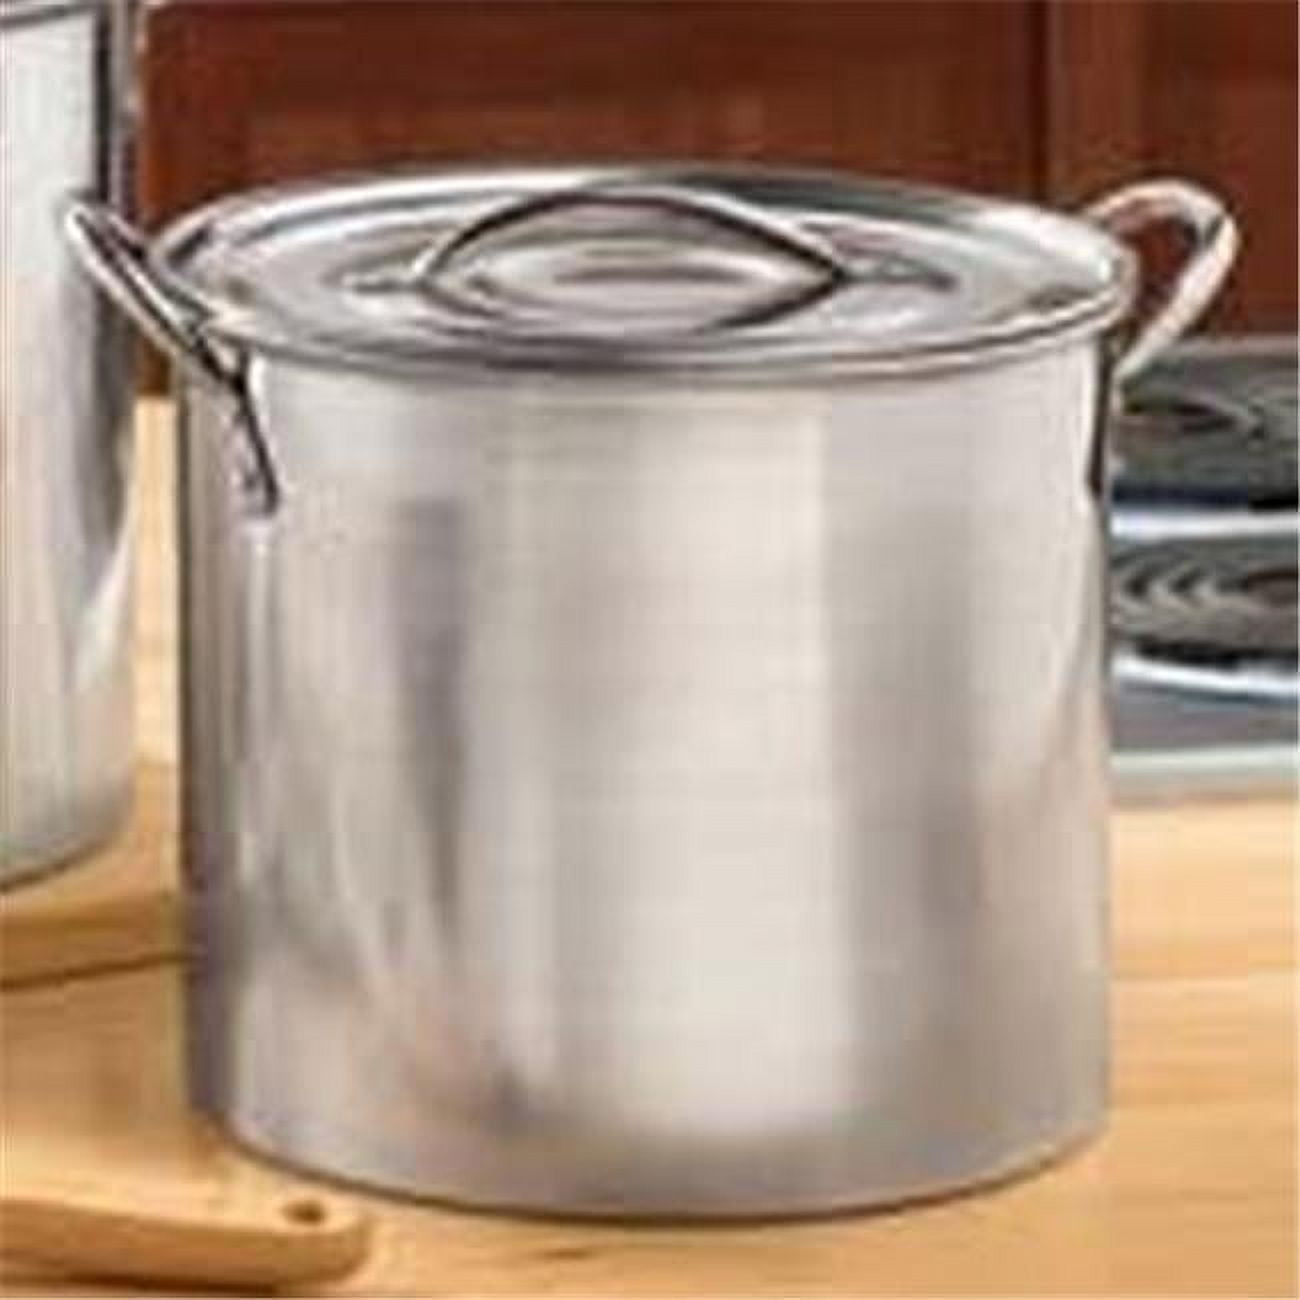  Large Pot for Cooking 8 Quart, BEZIA Induction Pot, Soup Pot, Cooking  Pot with Lid, Non Stick Stock Pot for All Hobs, Copper: Home & Kitchen